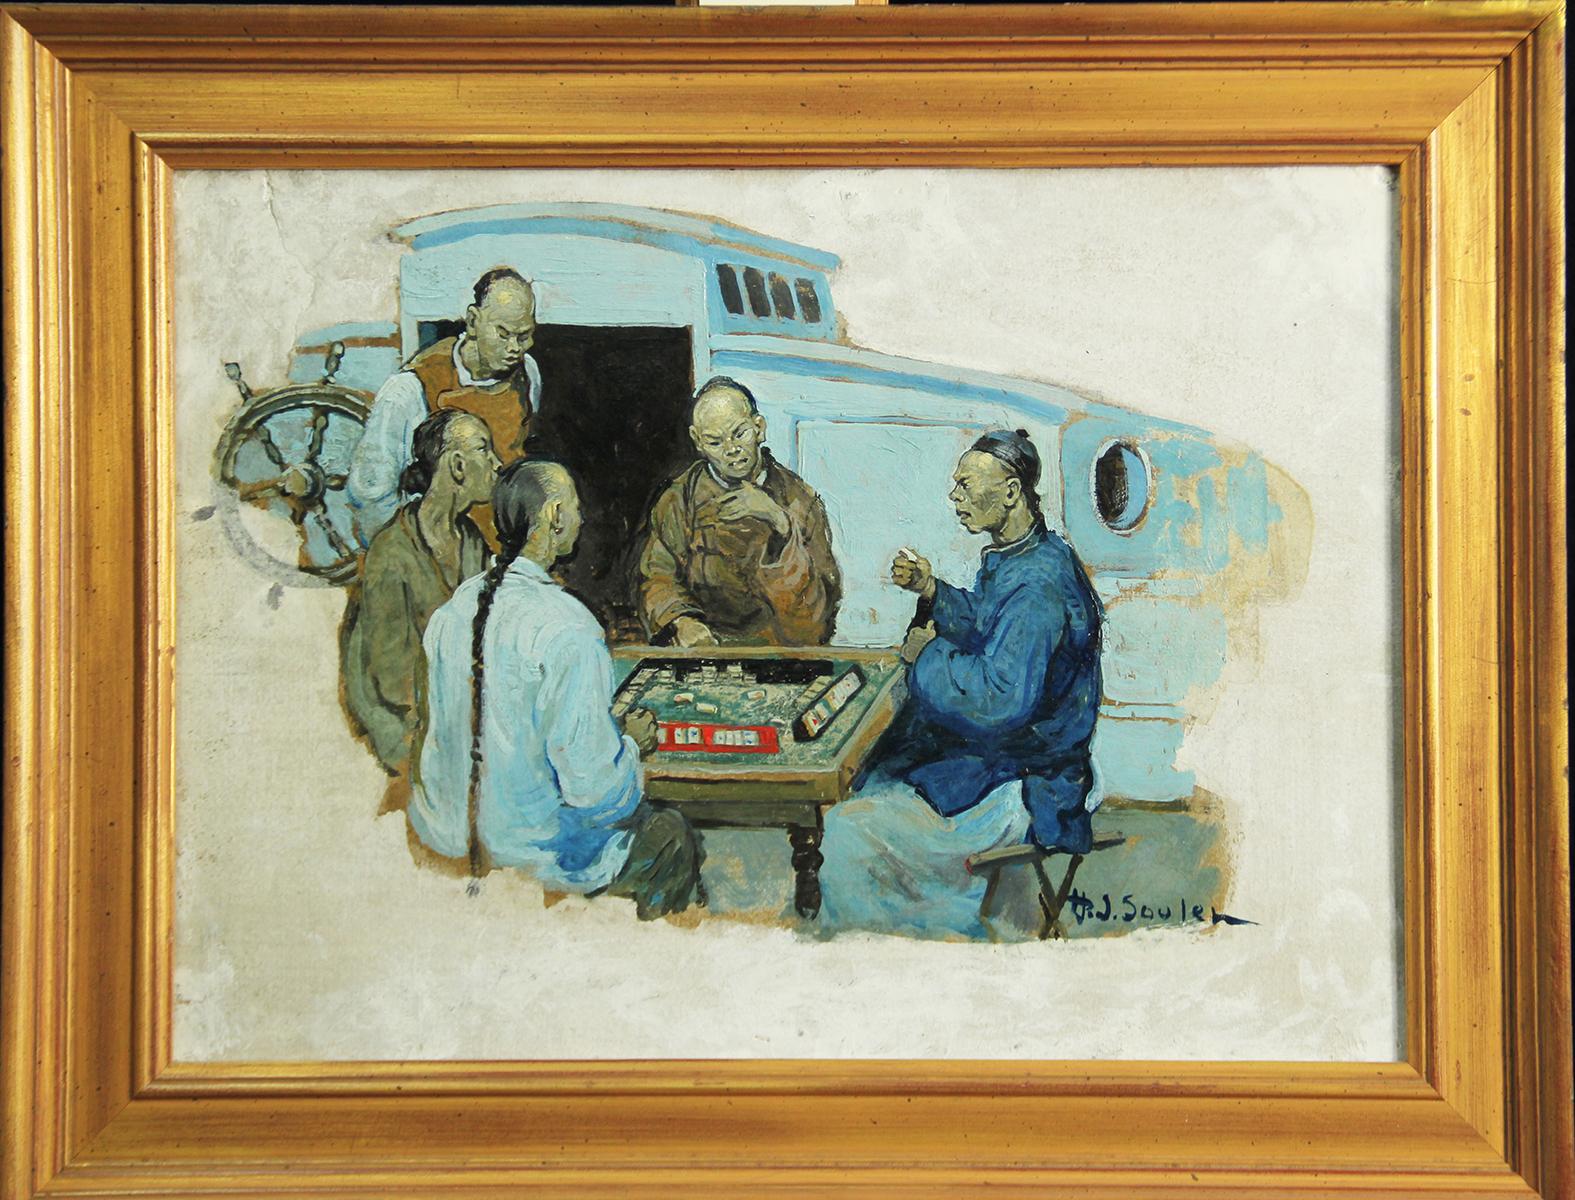 "Mahyong" by Henry James Soulen is a 12" x 16" oil on board painting from 1923, depicting a group of men engaged in a tile based game developed in China. 
The painting is signed "H J Soulen" in the lower right and came from the estate of the